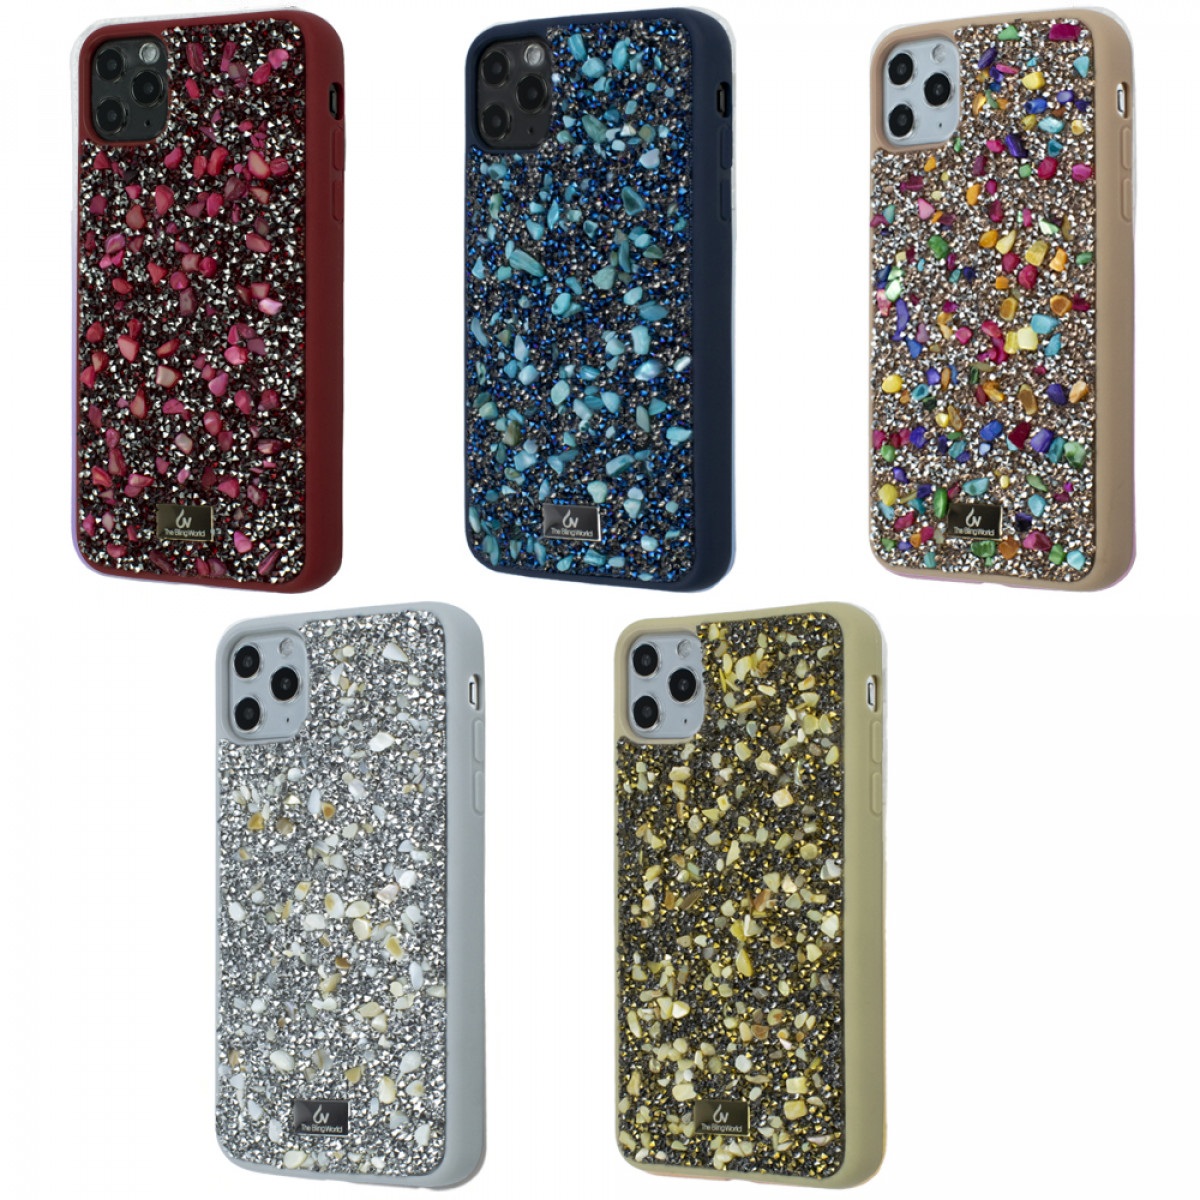 Bling STONE Case iPhone 11 Pro Max